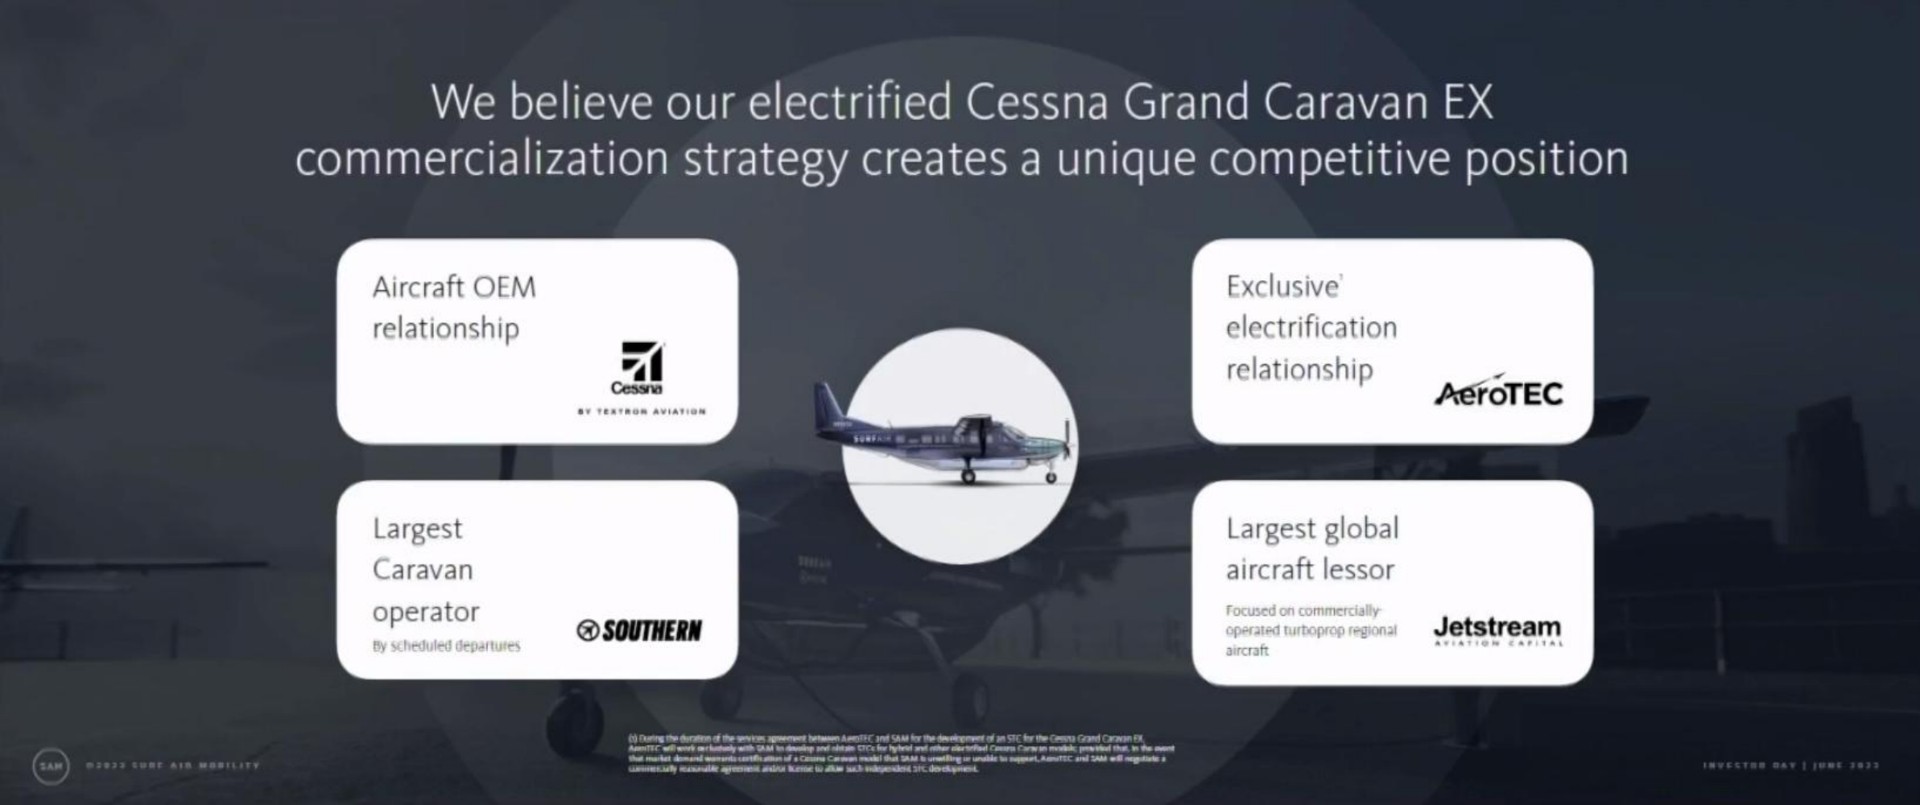 relationship aircraft we believe our electrified grand caravan commercialization strategy creates a unique competitive position operator global aircraft lessor caravan electrification relationship exclusive | Surf Air